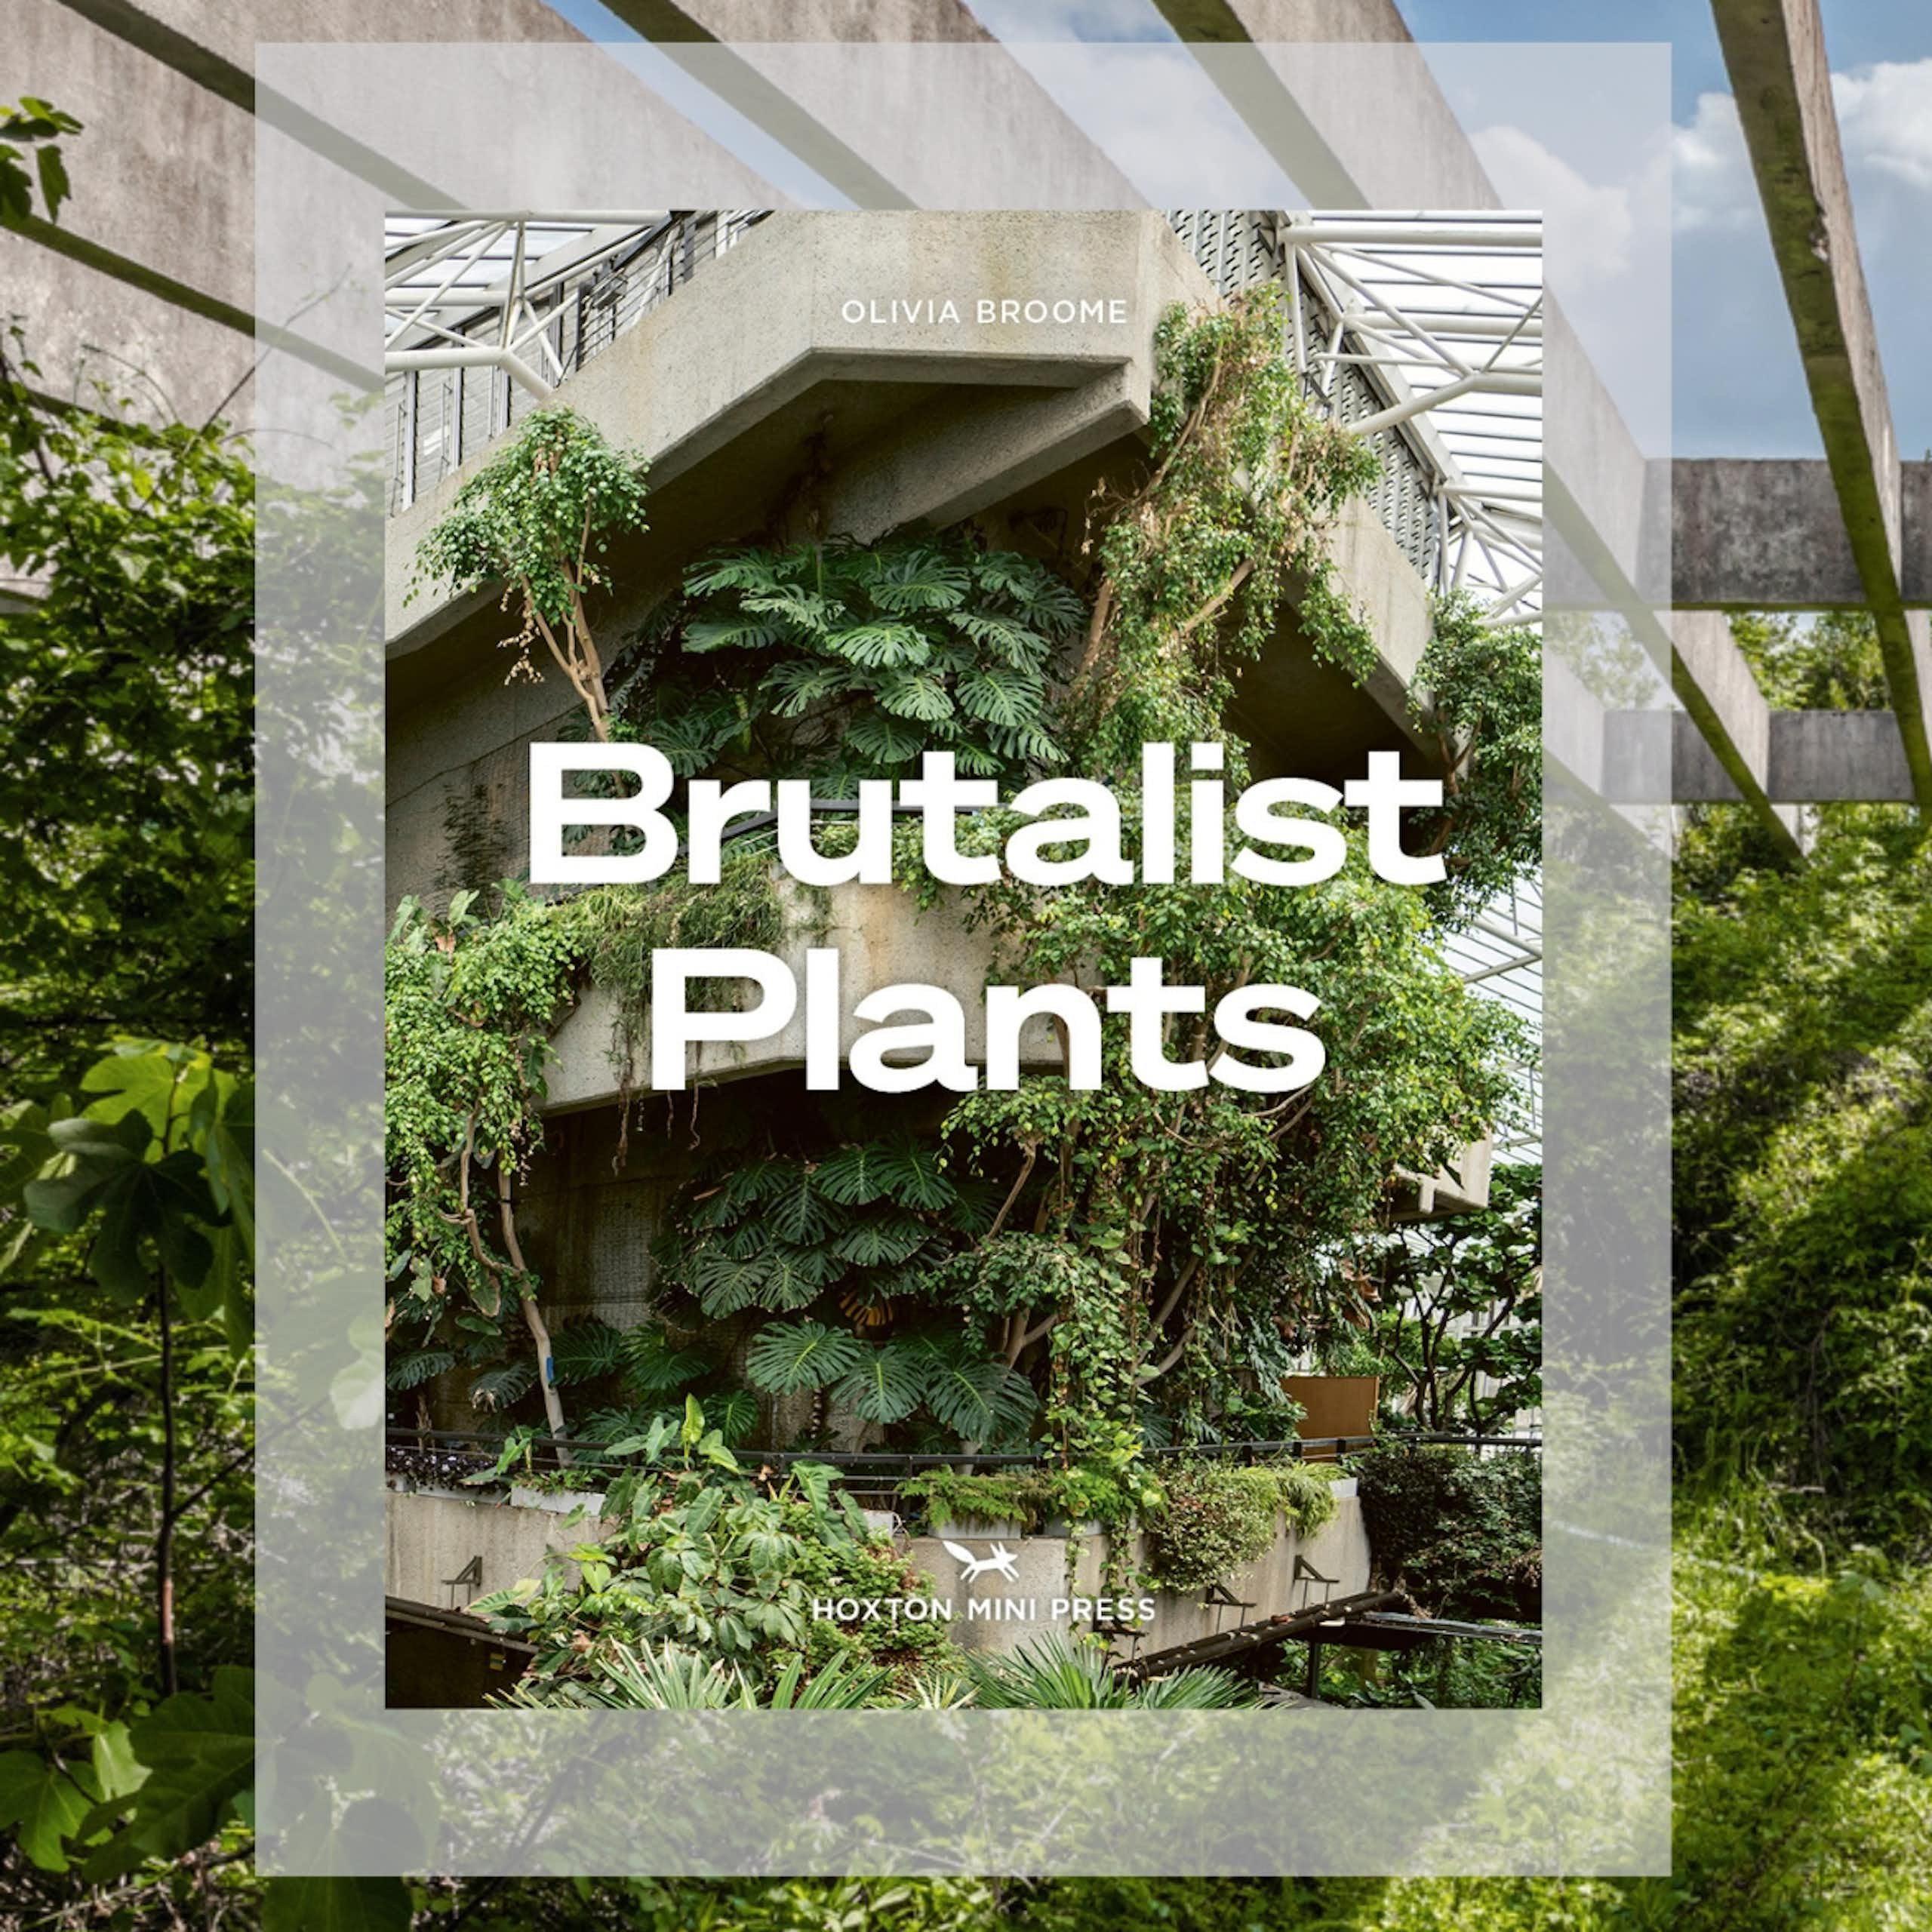 The cover for Brutalist Plants set against some concrete and greenery